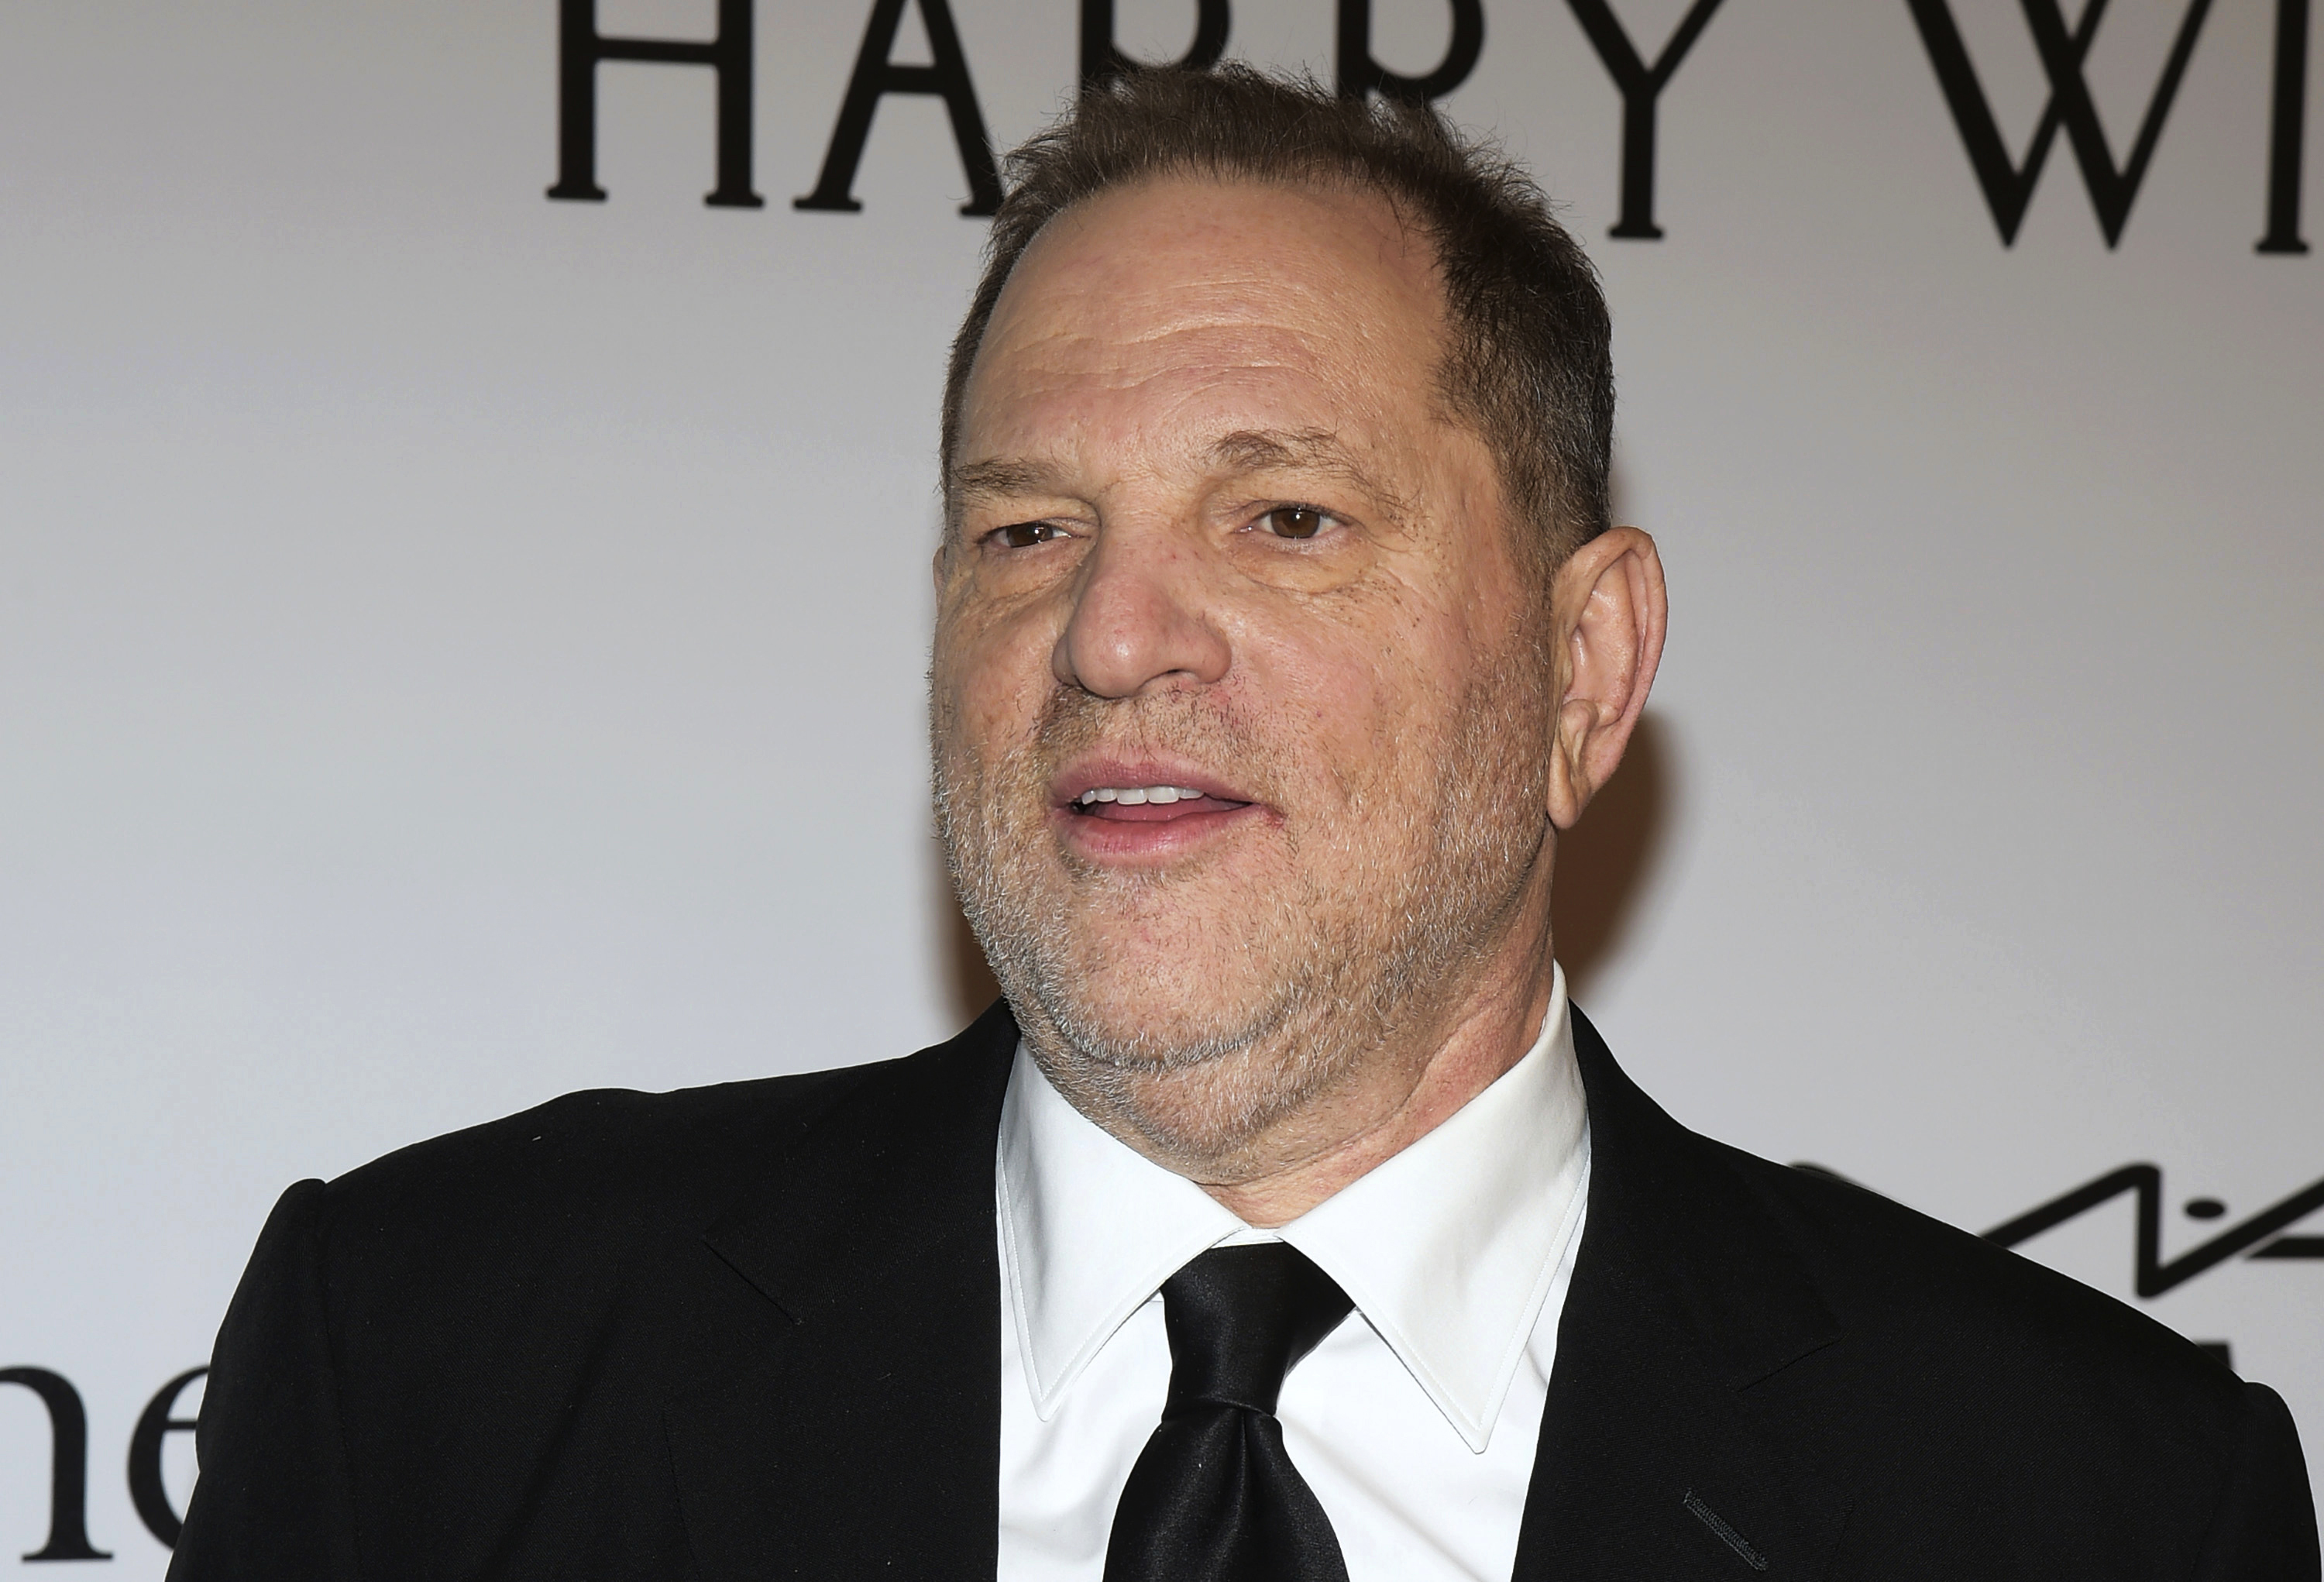 Harvey Weinstein in New York on Feb. 10, 2016. Private equity firm Lantern Capital emerged  as the winning bidder for the Weinstein Co. (Charles Sykes— Invision/AP)